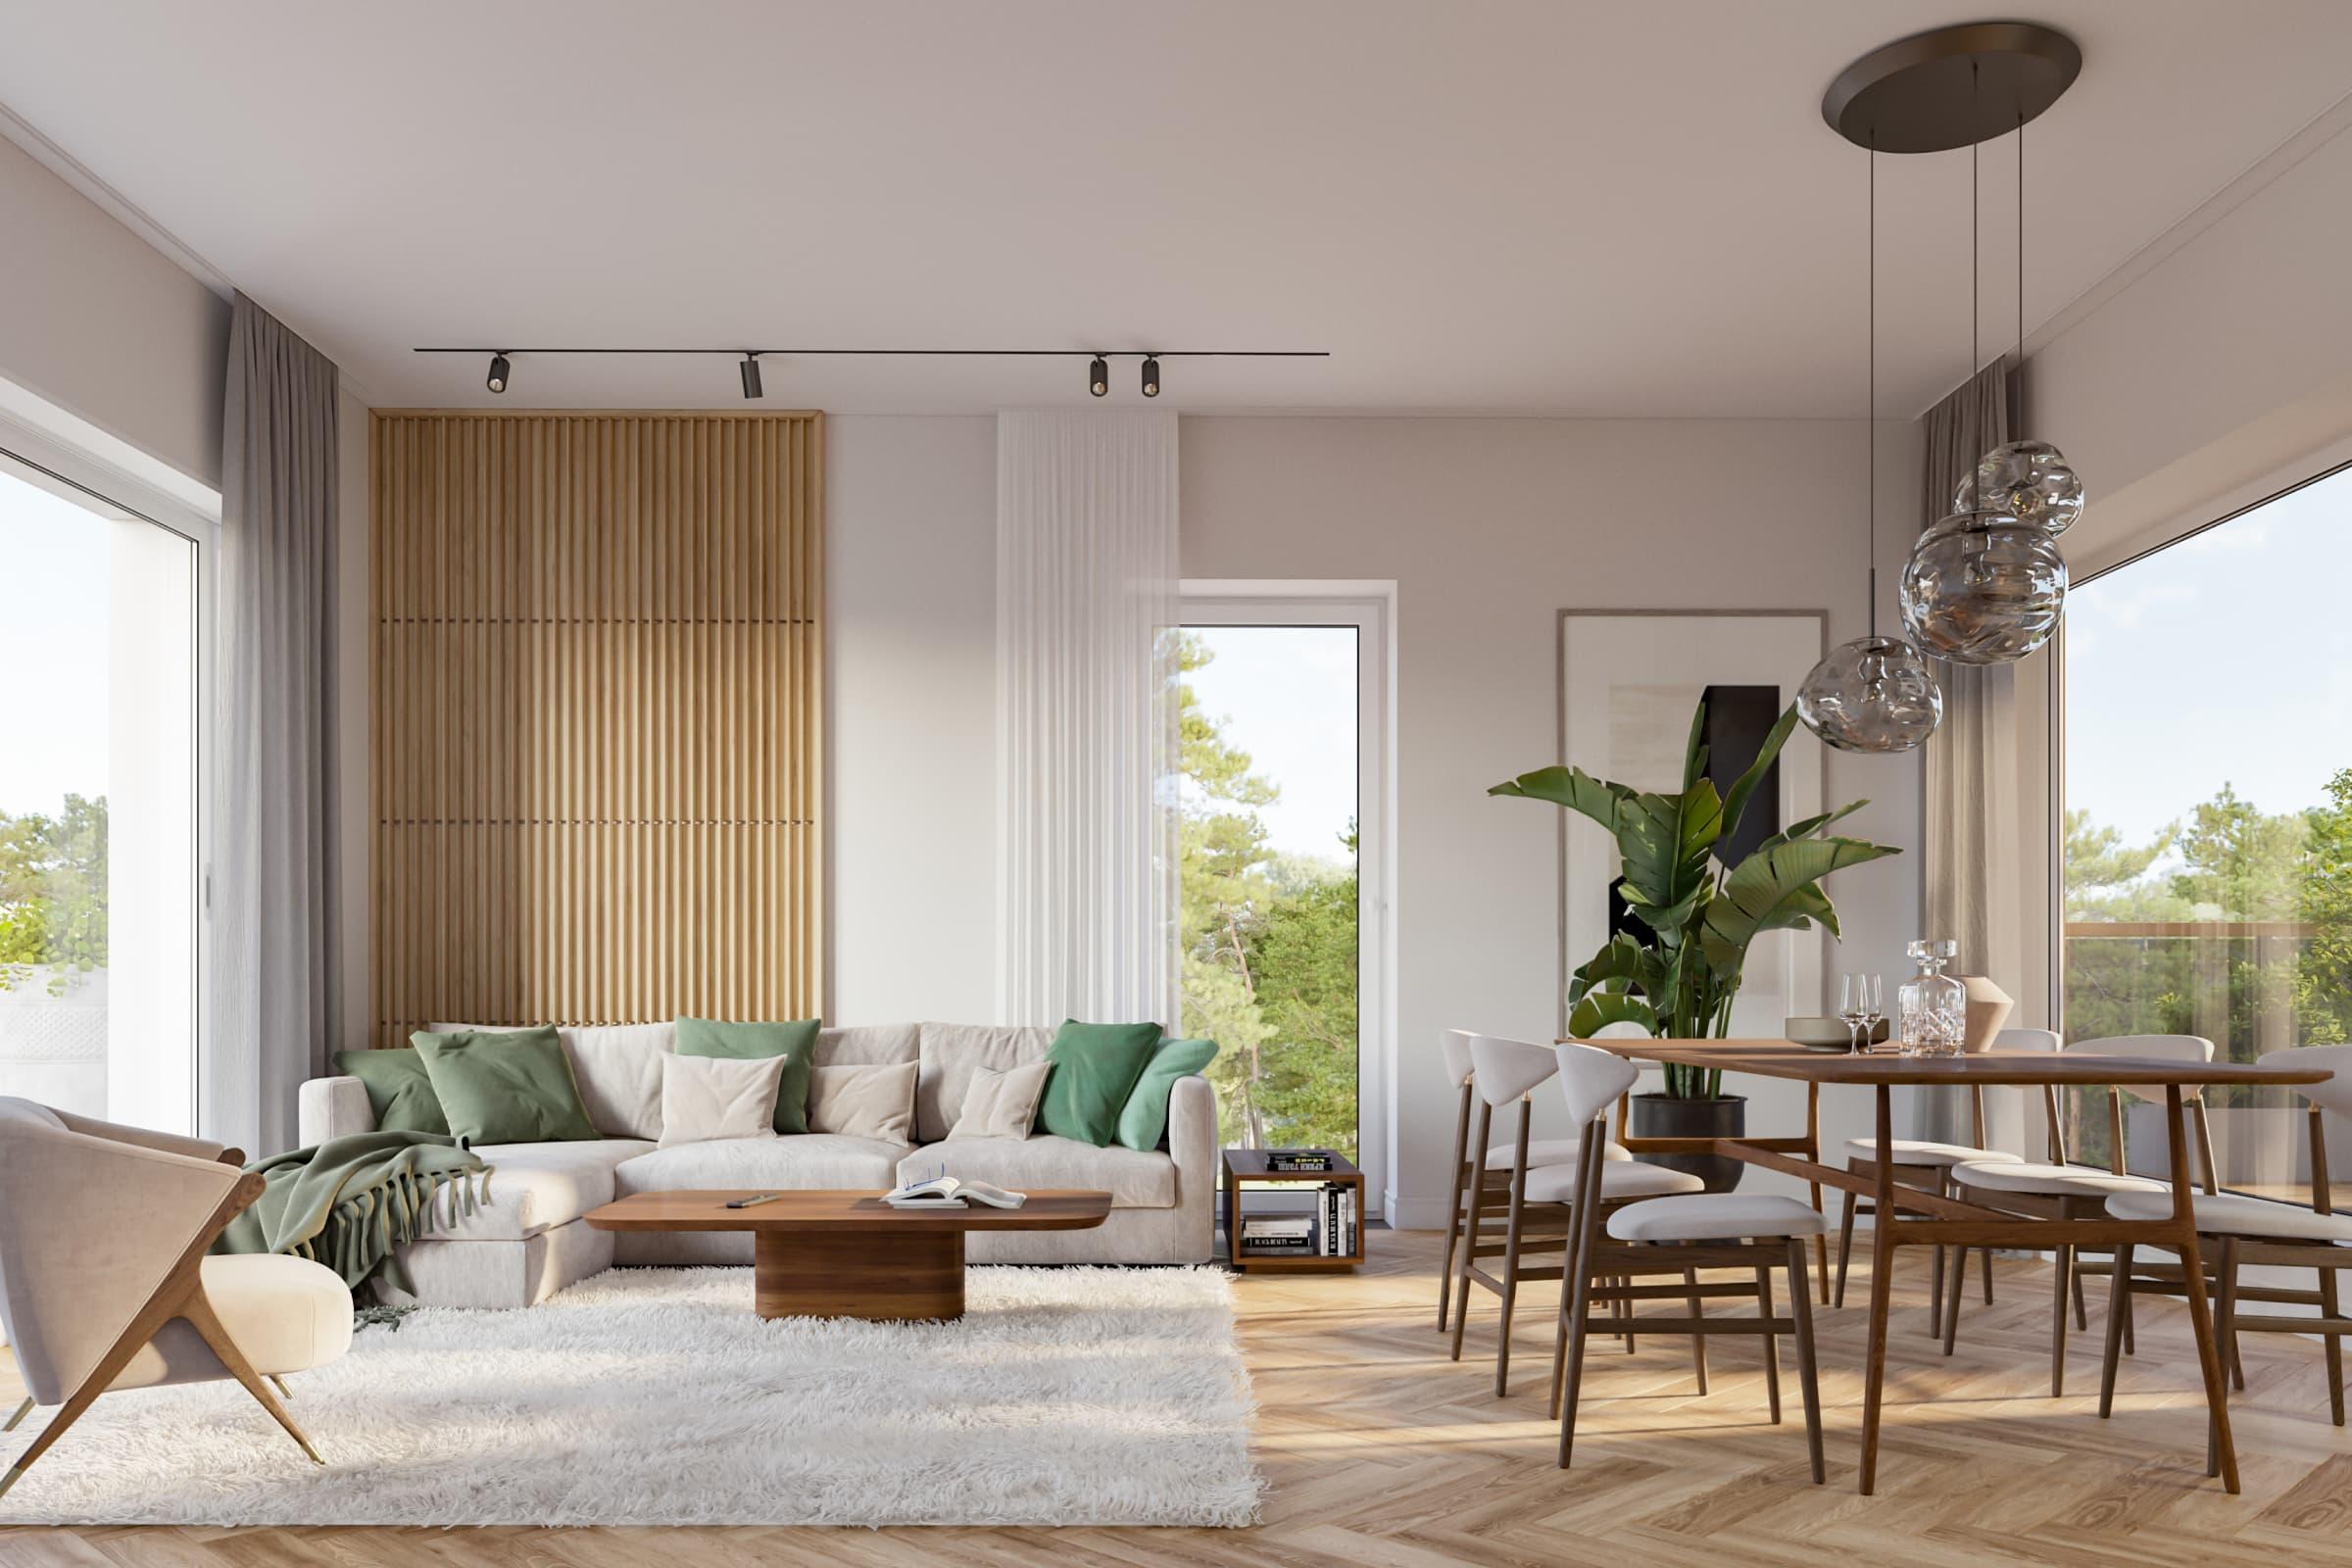 A meeting place for the whole family – an open-plan living room